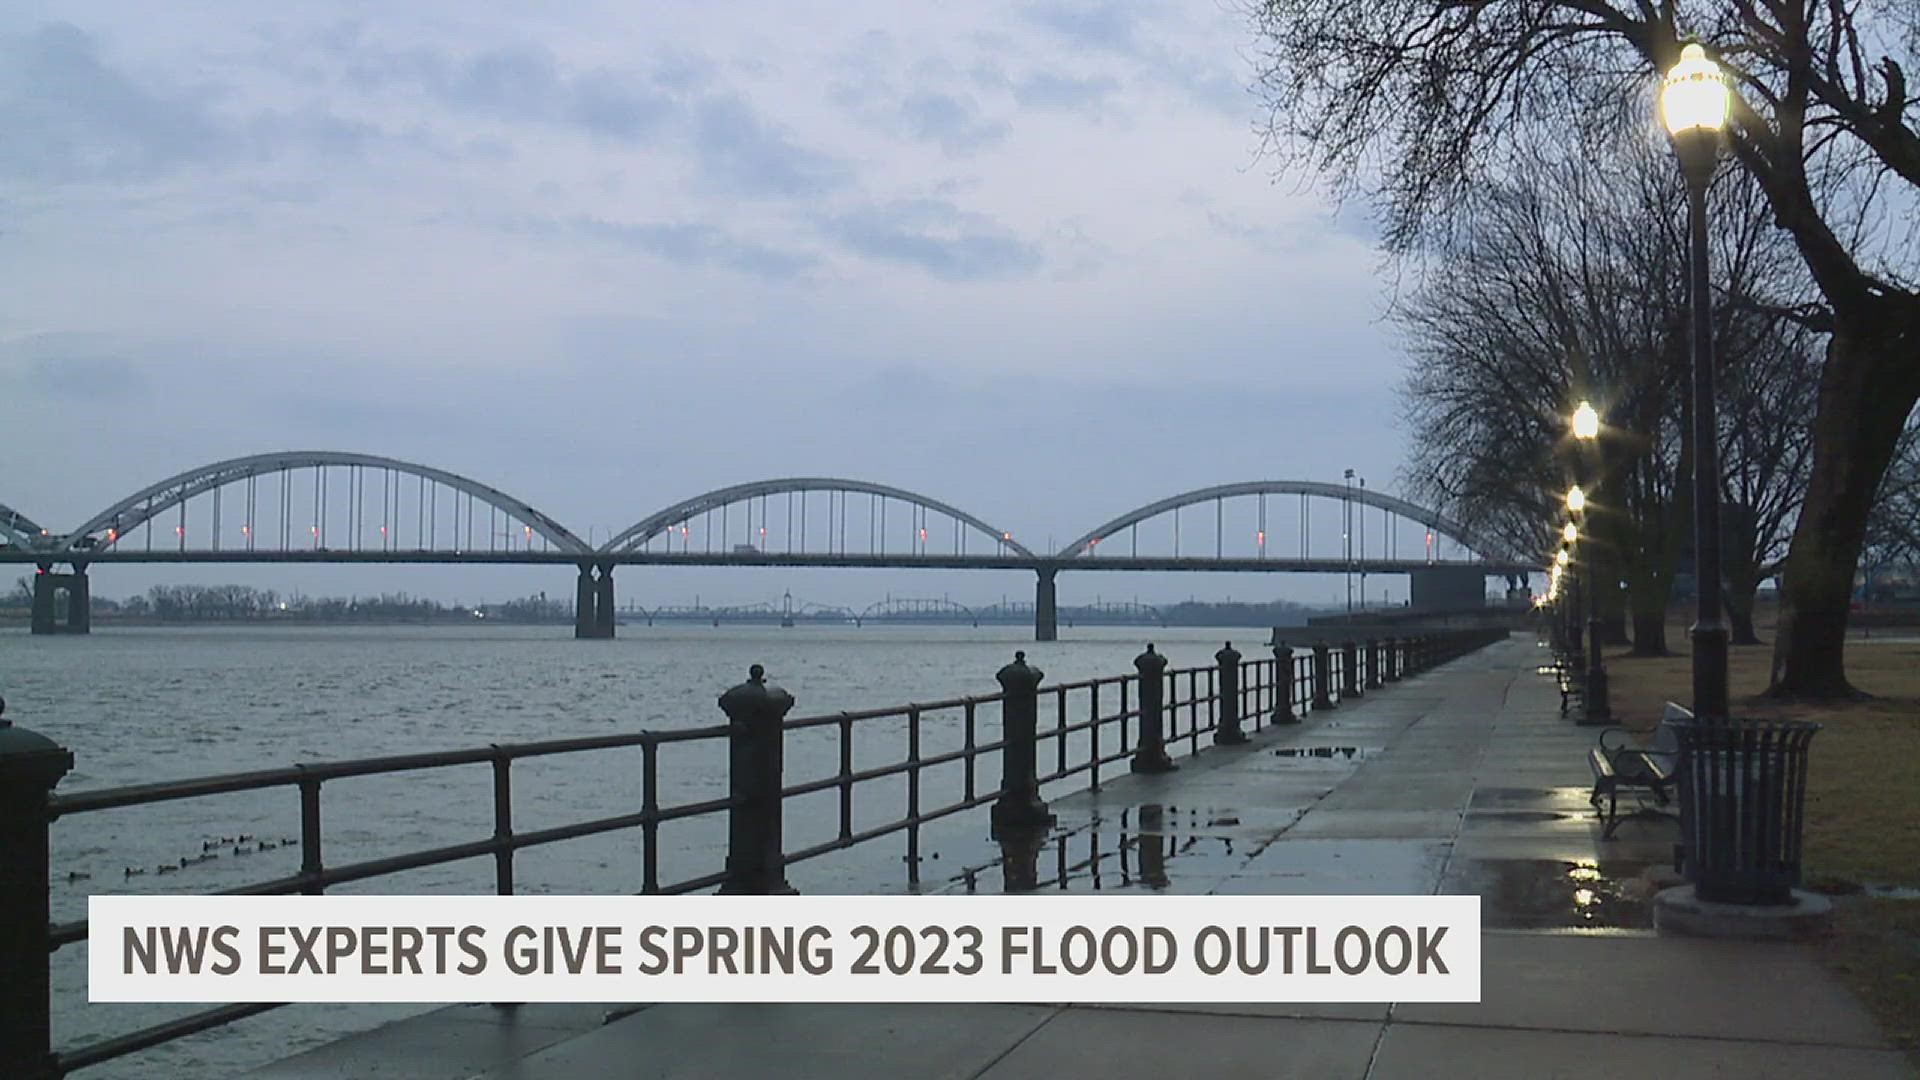 According to a hydrologist at NWS Quad Cities, the Mississippi River could see a higher-than-normal risk of moderate flooding depending on several factors.